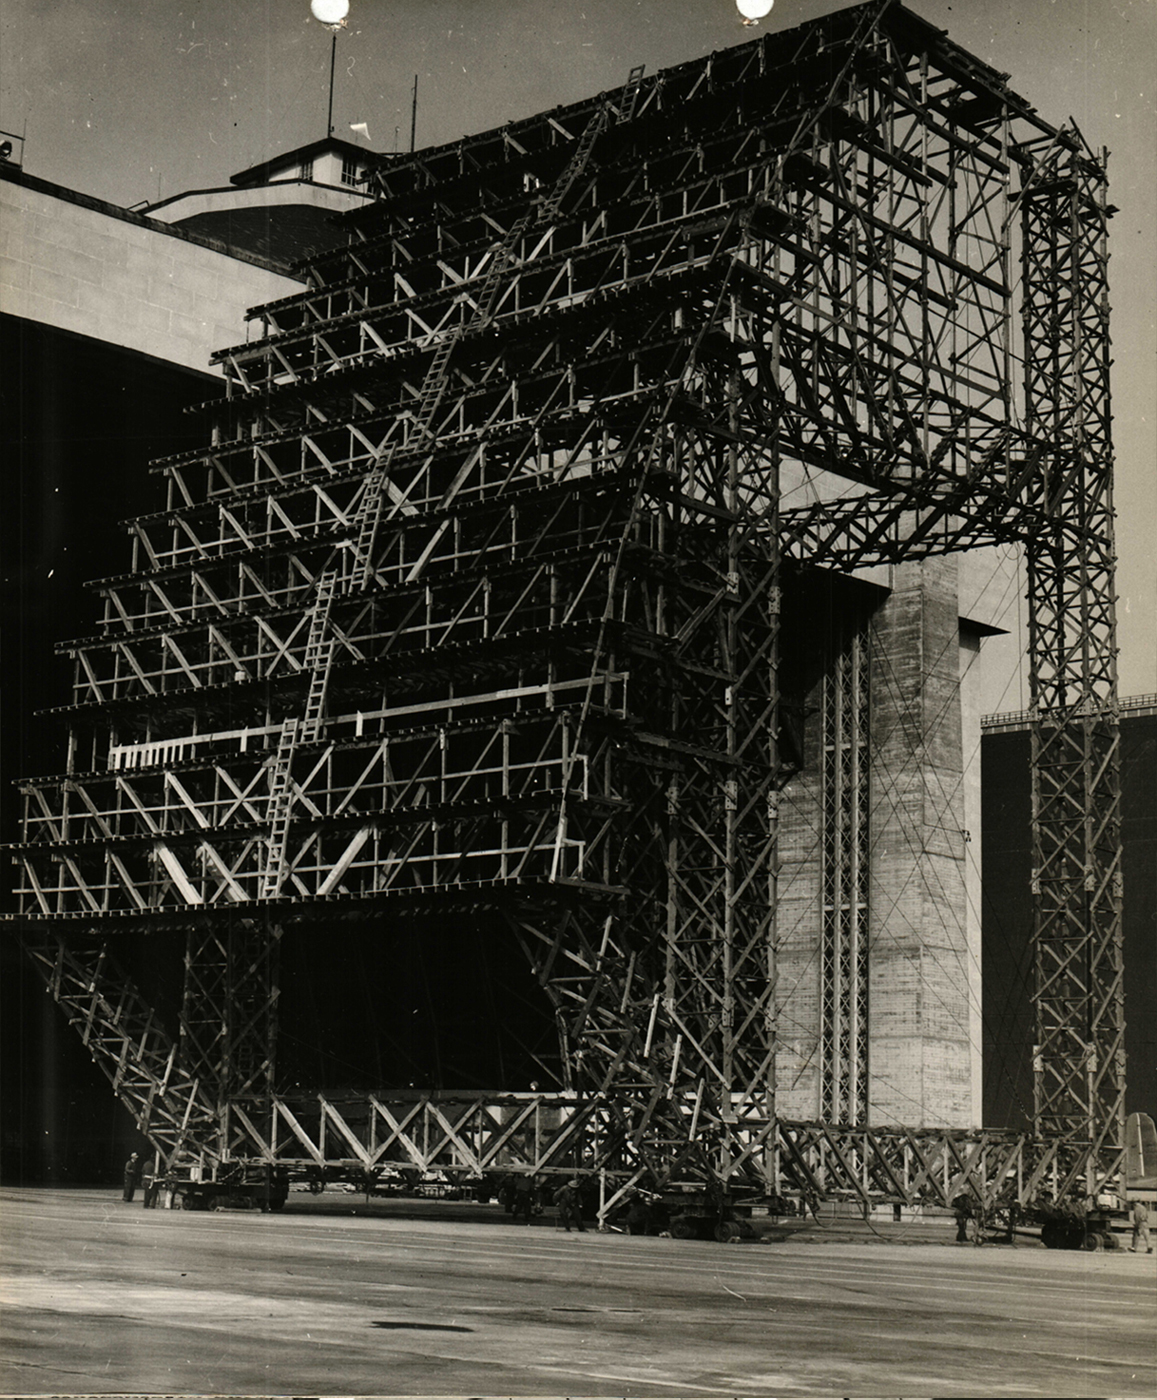 A tall, wide scaffolding tower on wheels waiting to be rolled into Hangar 3. It has a curved side that matches the parabolic arch trusses of the hangar.